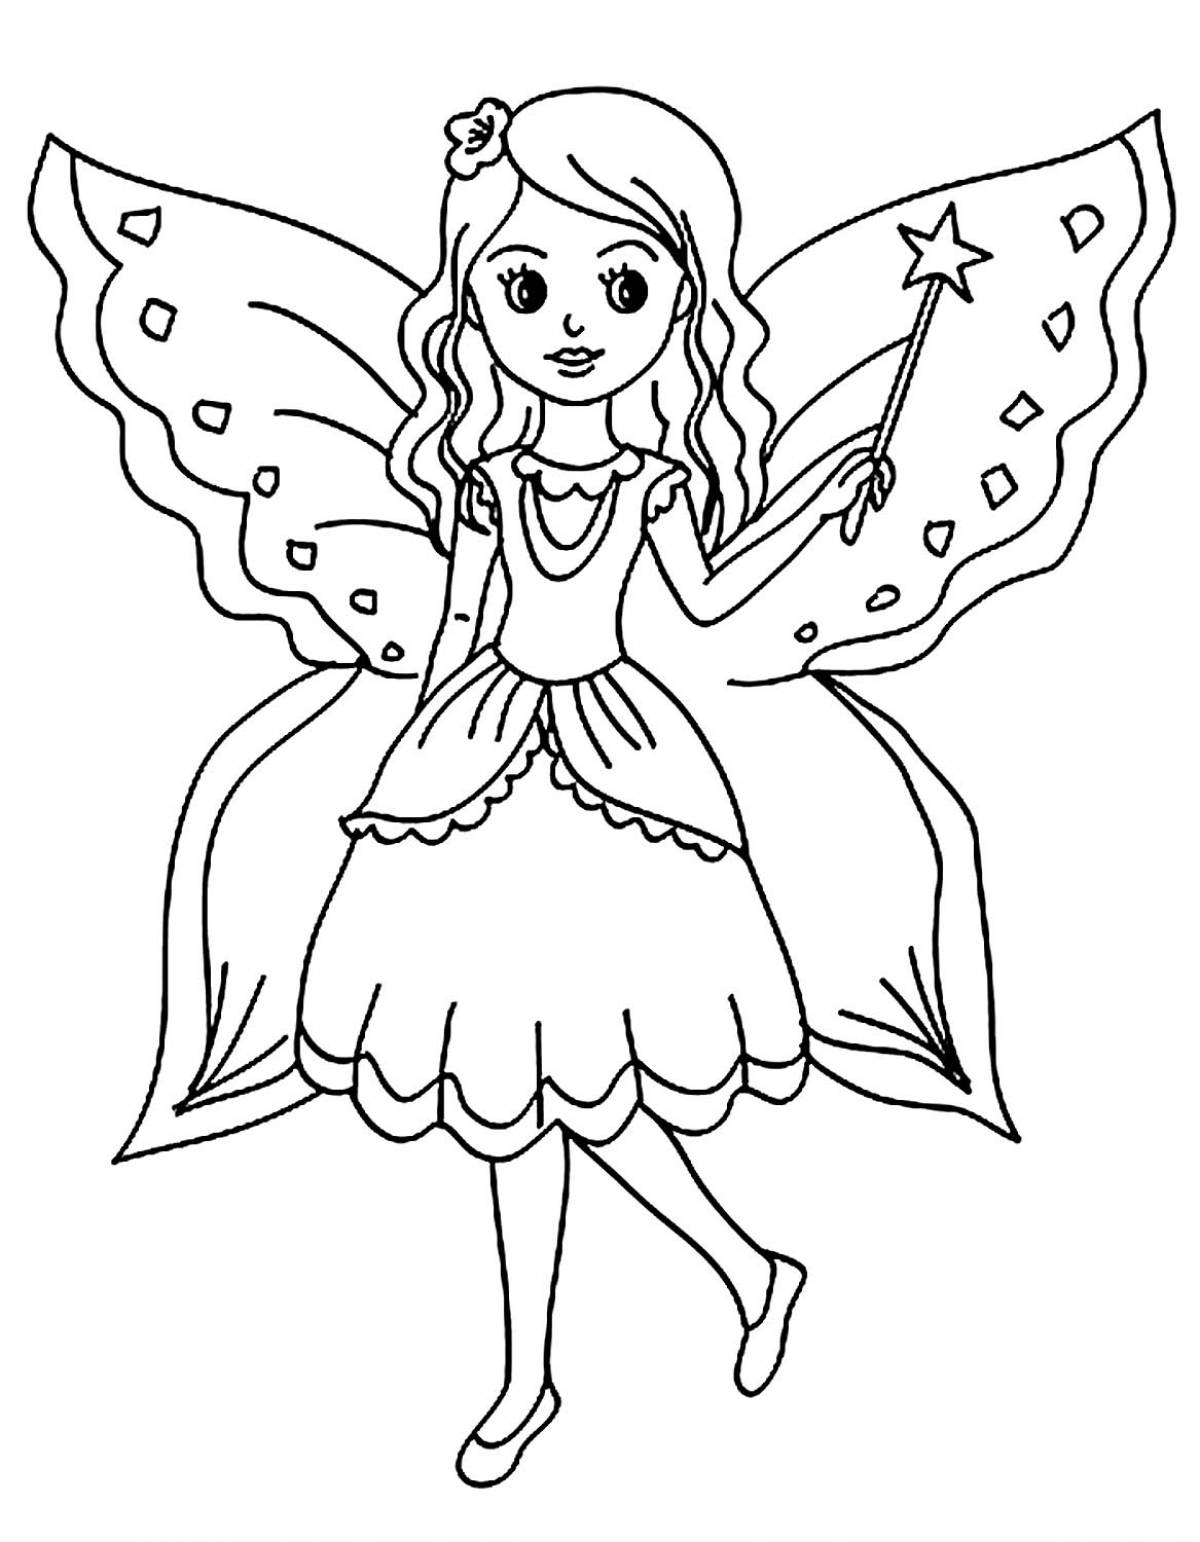 Wonderful fairy tooth coloring book for kids